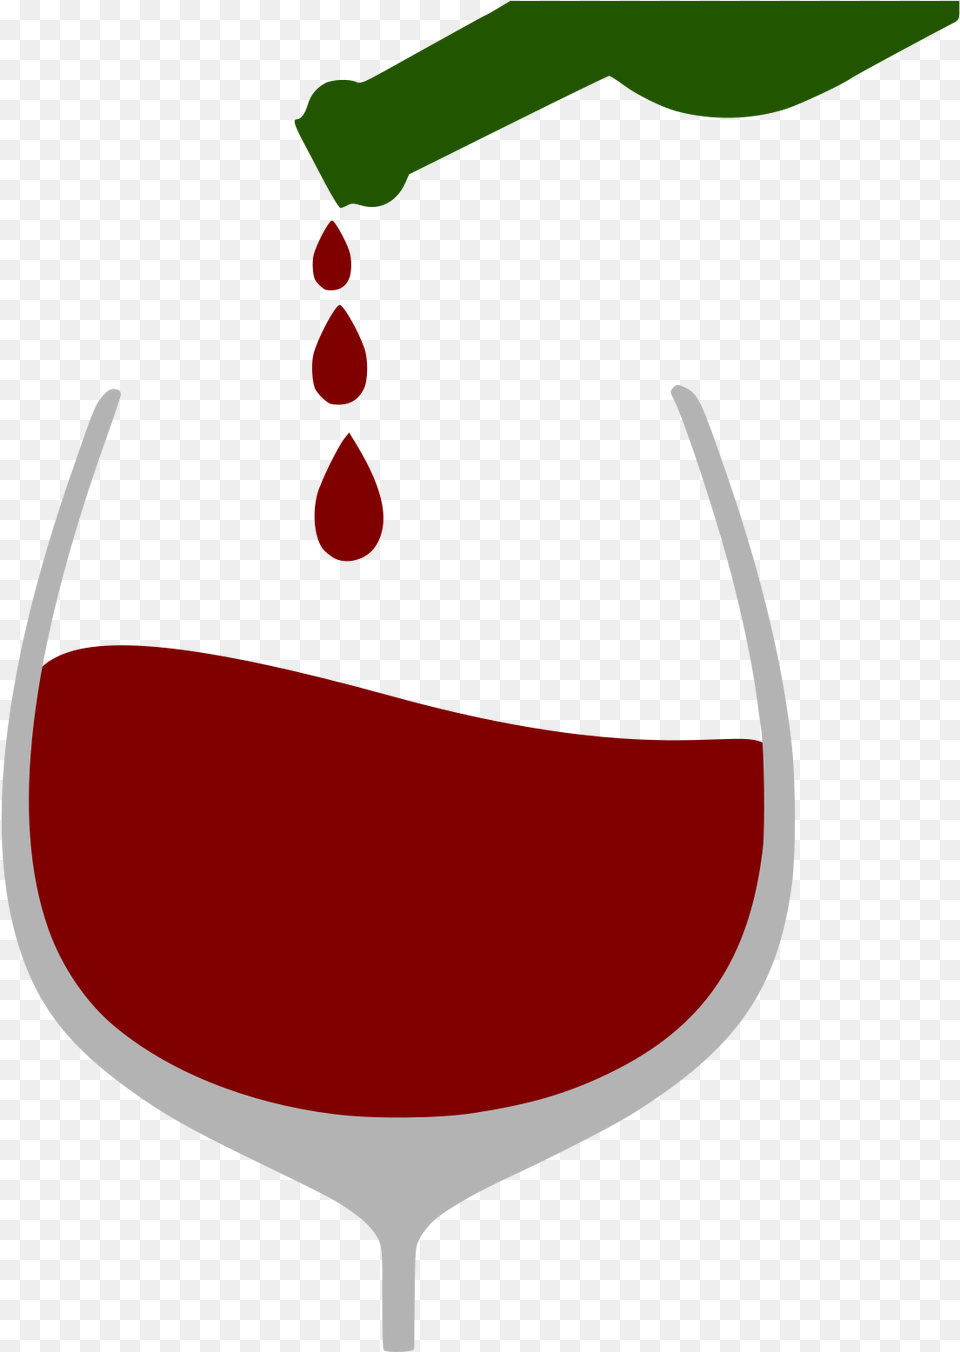 Download Wine Glass Clipart Wine Glass Red Wine Wine Glass, Alcohol, Beverage, Liquor, Red Wine Png